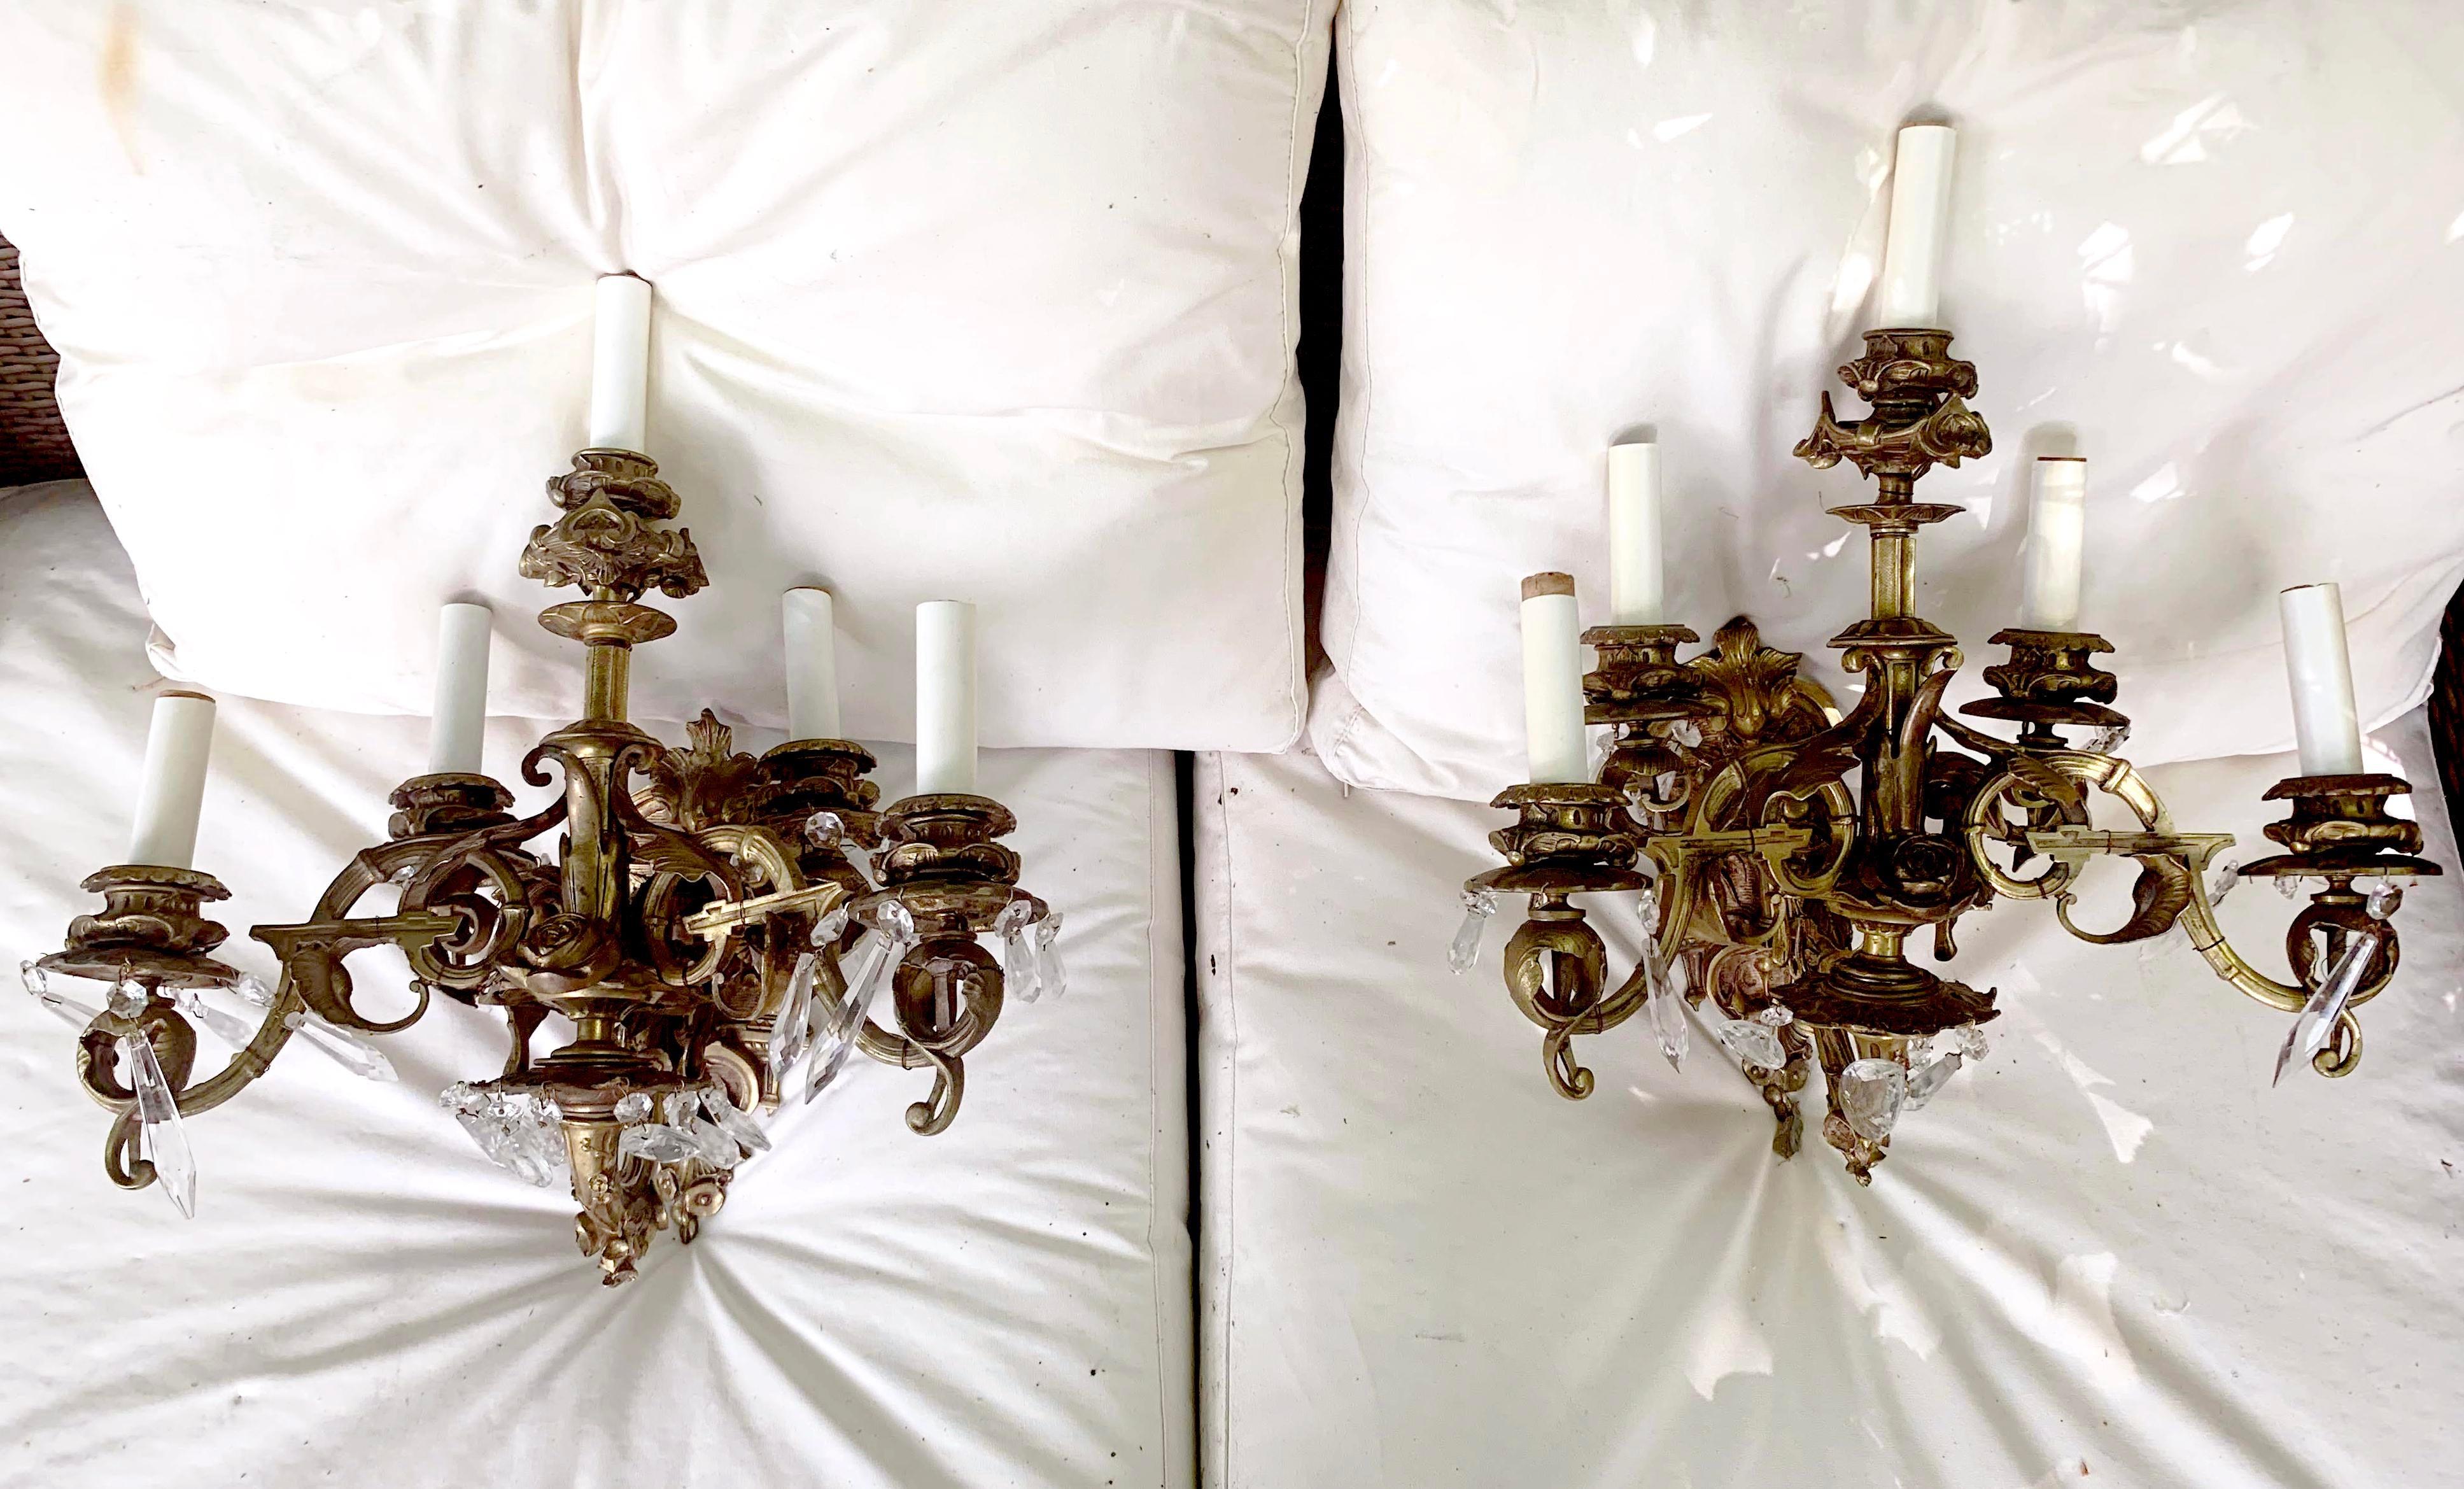 Pair of English Rosebud Gilt, Bronze and Crystal Sconces, Circa 1800. Consists of heavy cast bronze and crystal. They have been rewired and are compatible with North American electrical requirements.

Dimensions
18 